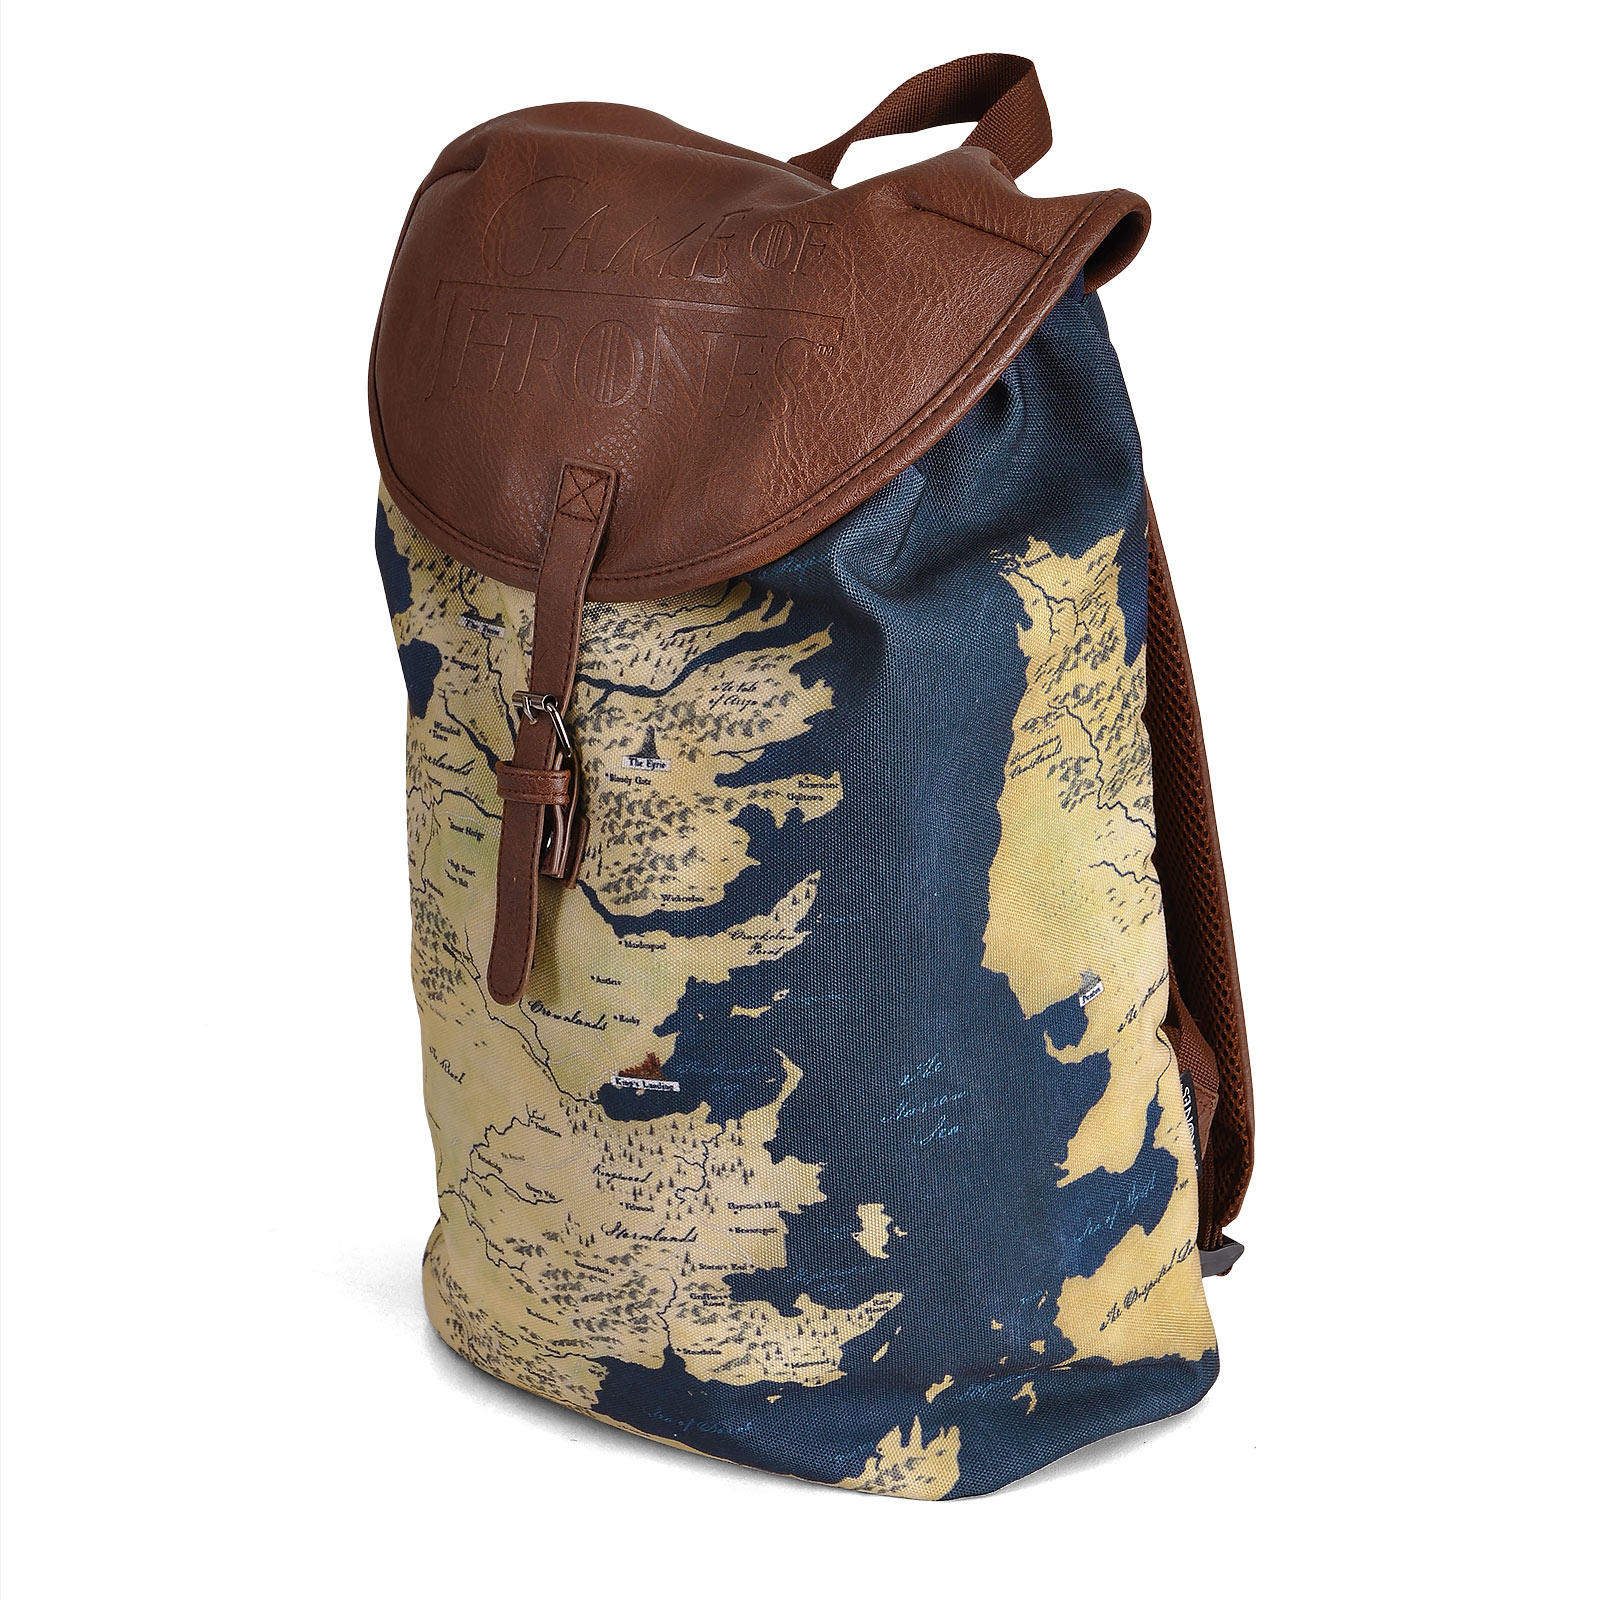 Game of Thrones - Westeros and Essos Backpack